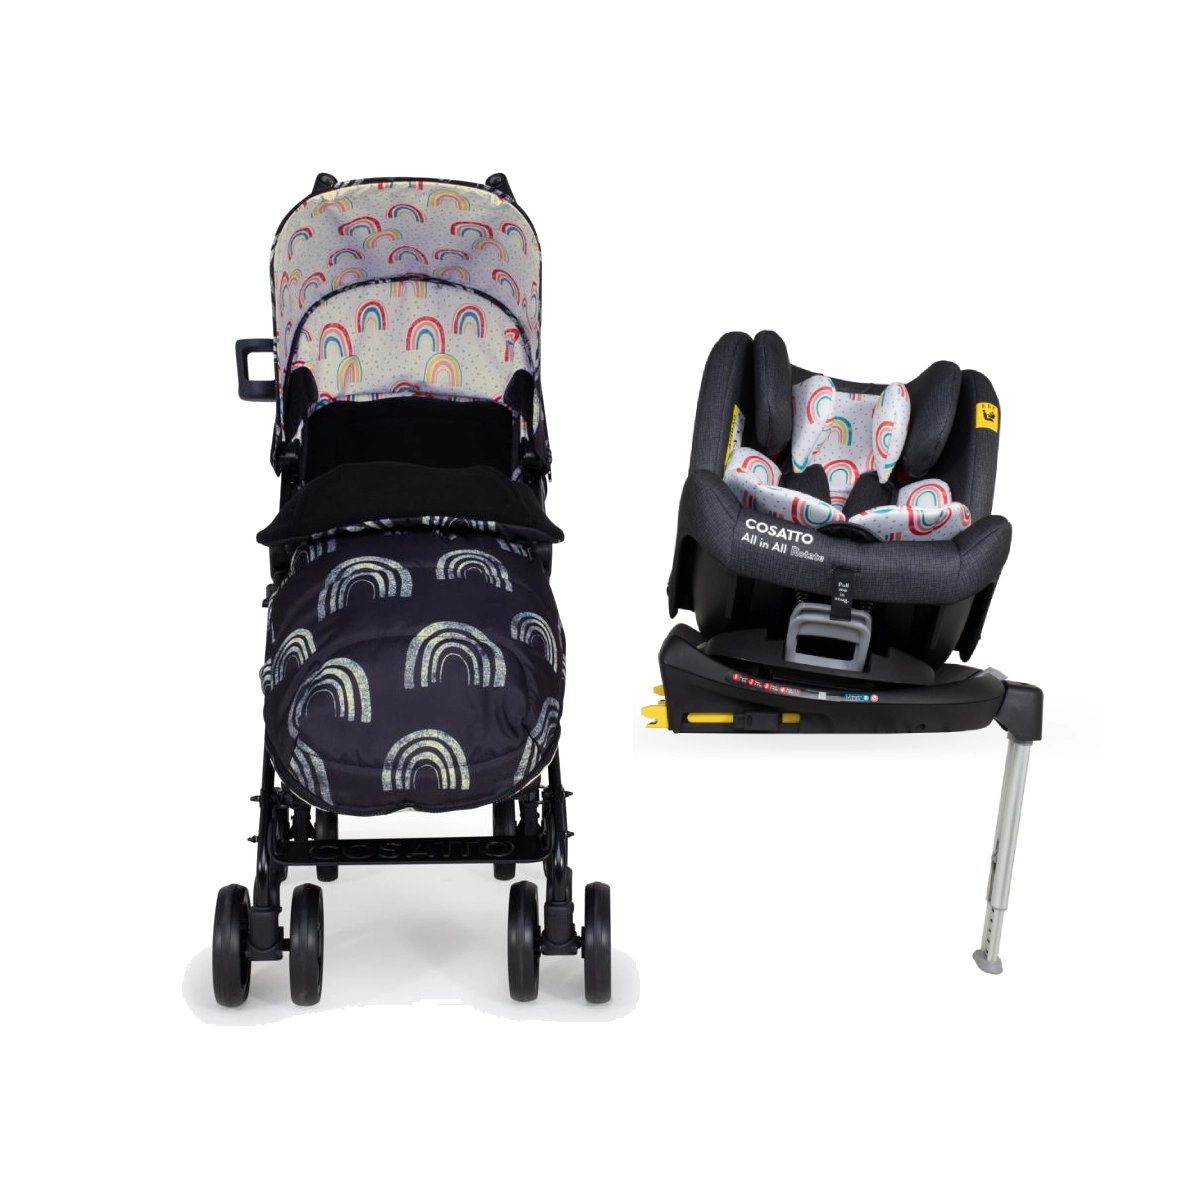 Image of Cosatto Supa 3 Stroller & All in All Rotate Car Seat Bundle - Night Rainbow (Exclusive to Kiddies Kingdom)